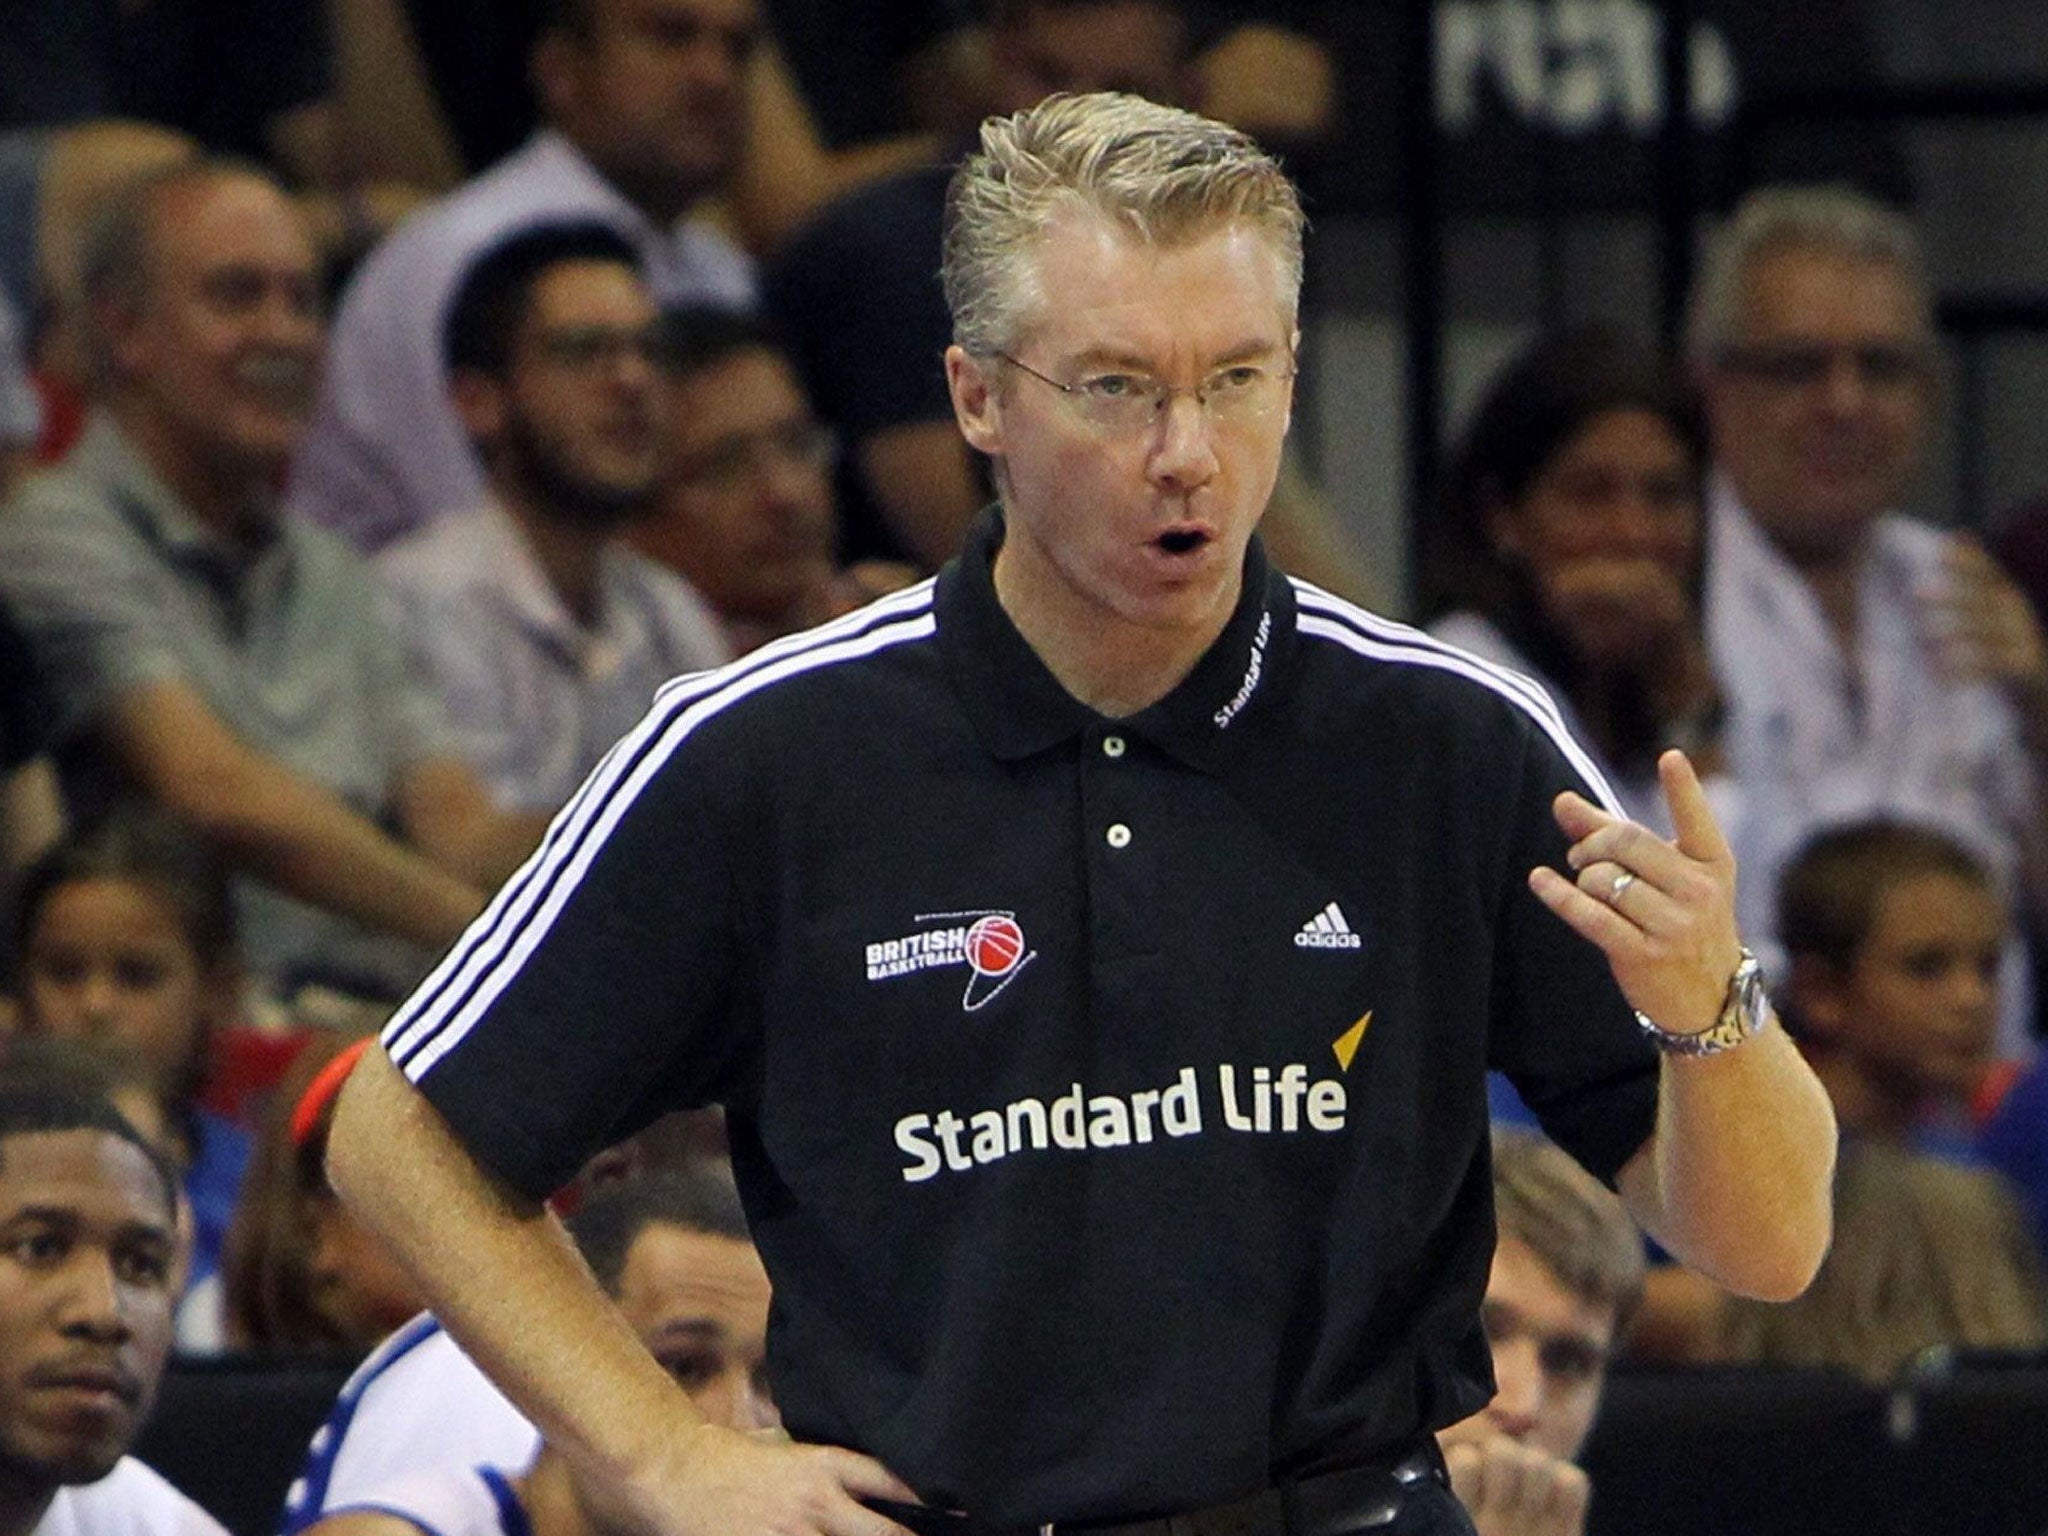 The win over Germany has given coach Joe Prunty and his men hope of advancing from Group A